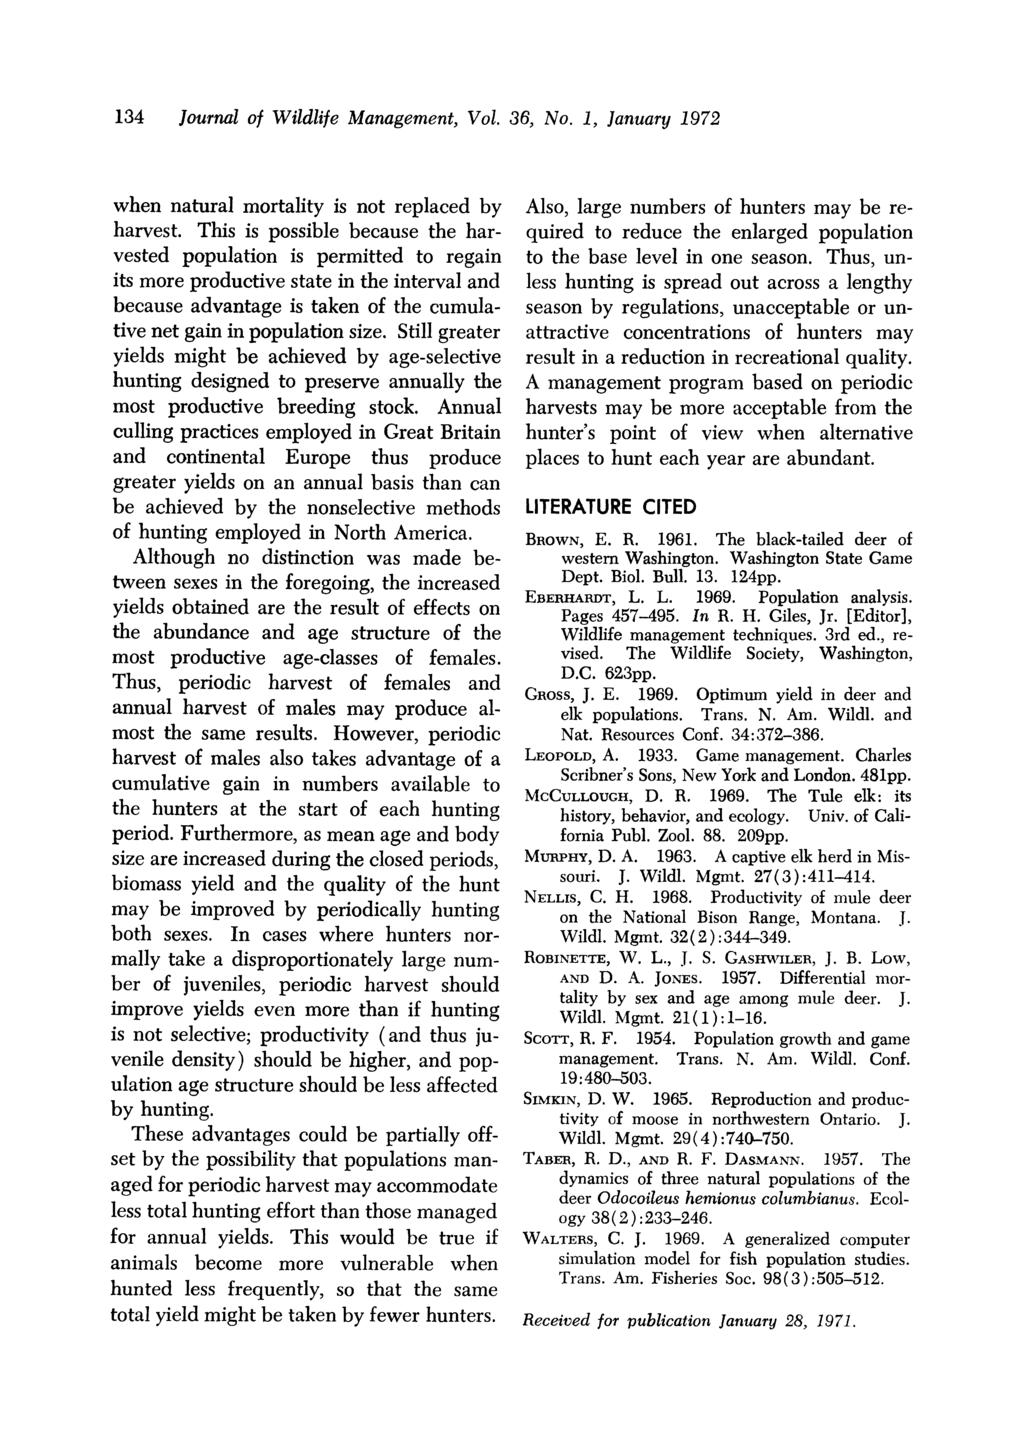 134 Journal of Wildlife Management, Vol. 36, No. 1, January 1972 when natural mortality is not replaced by harvest.